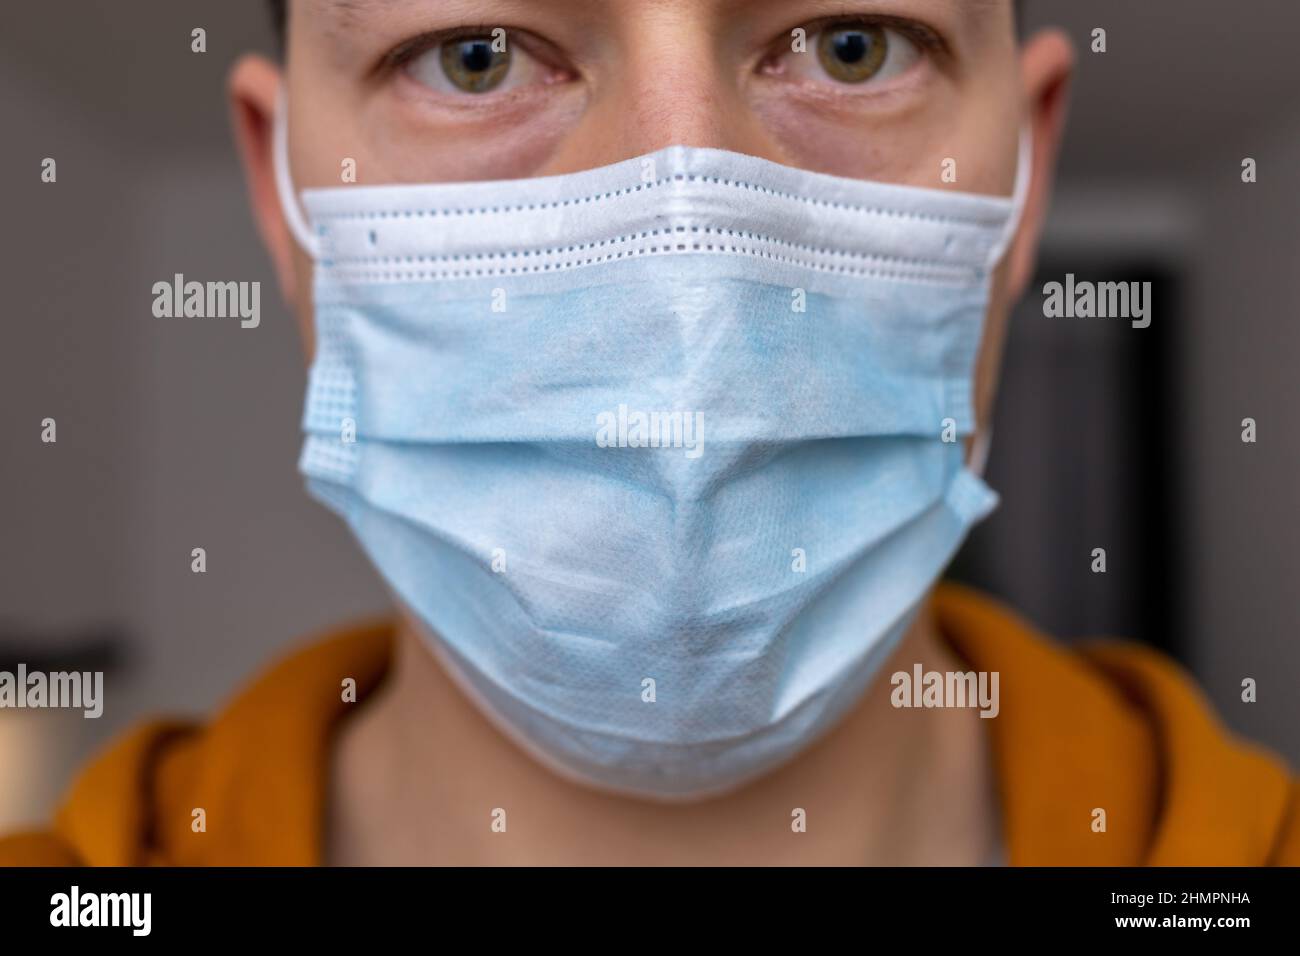 man with sad eyes in blue face mask Stock Photo